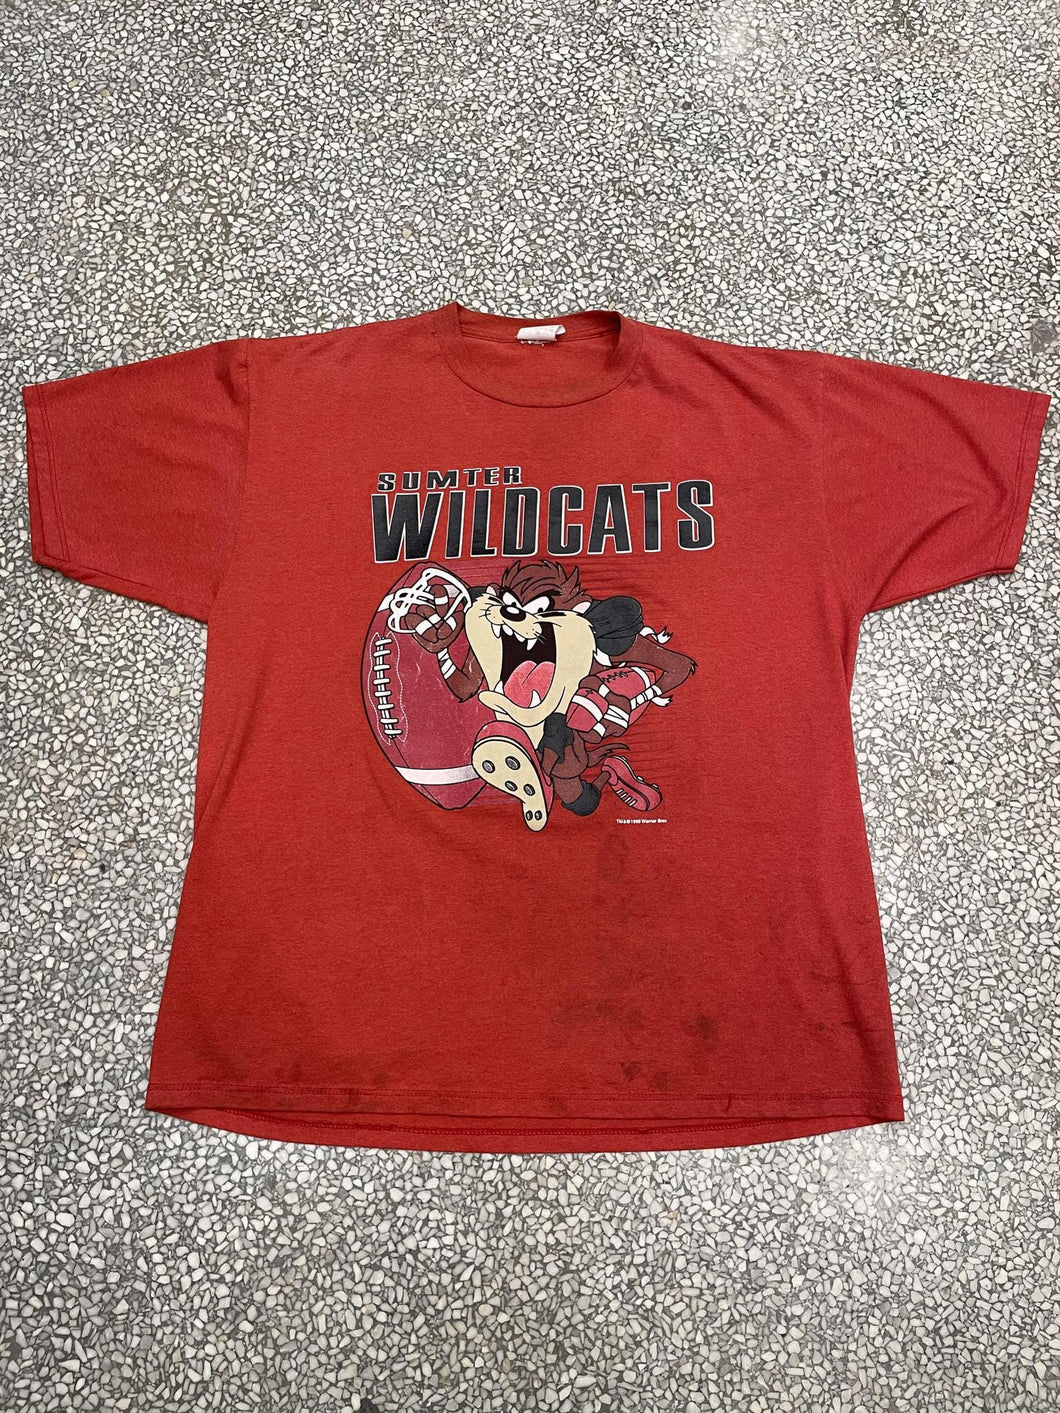 Sumter Wildcats Vintage 1995 Taz Faded Red ABC Vintage 